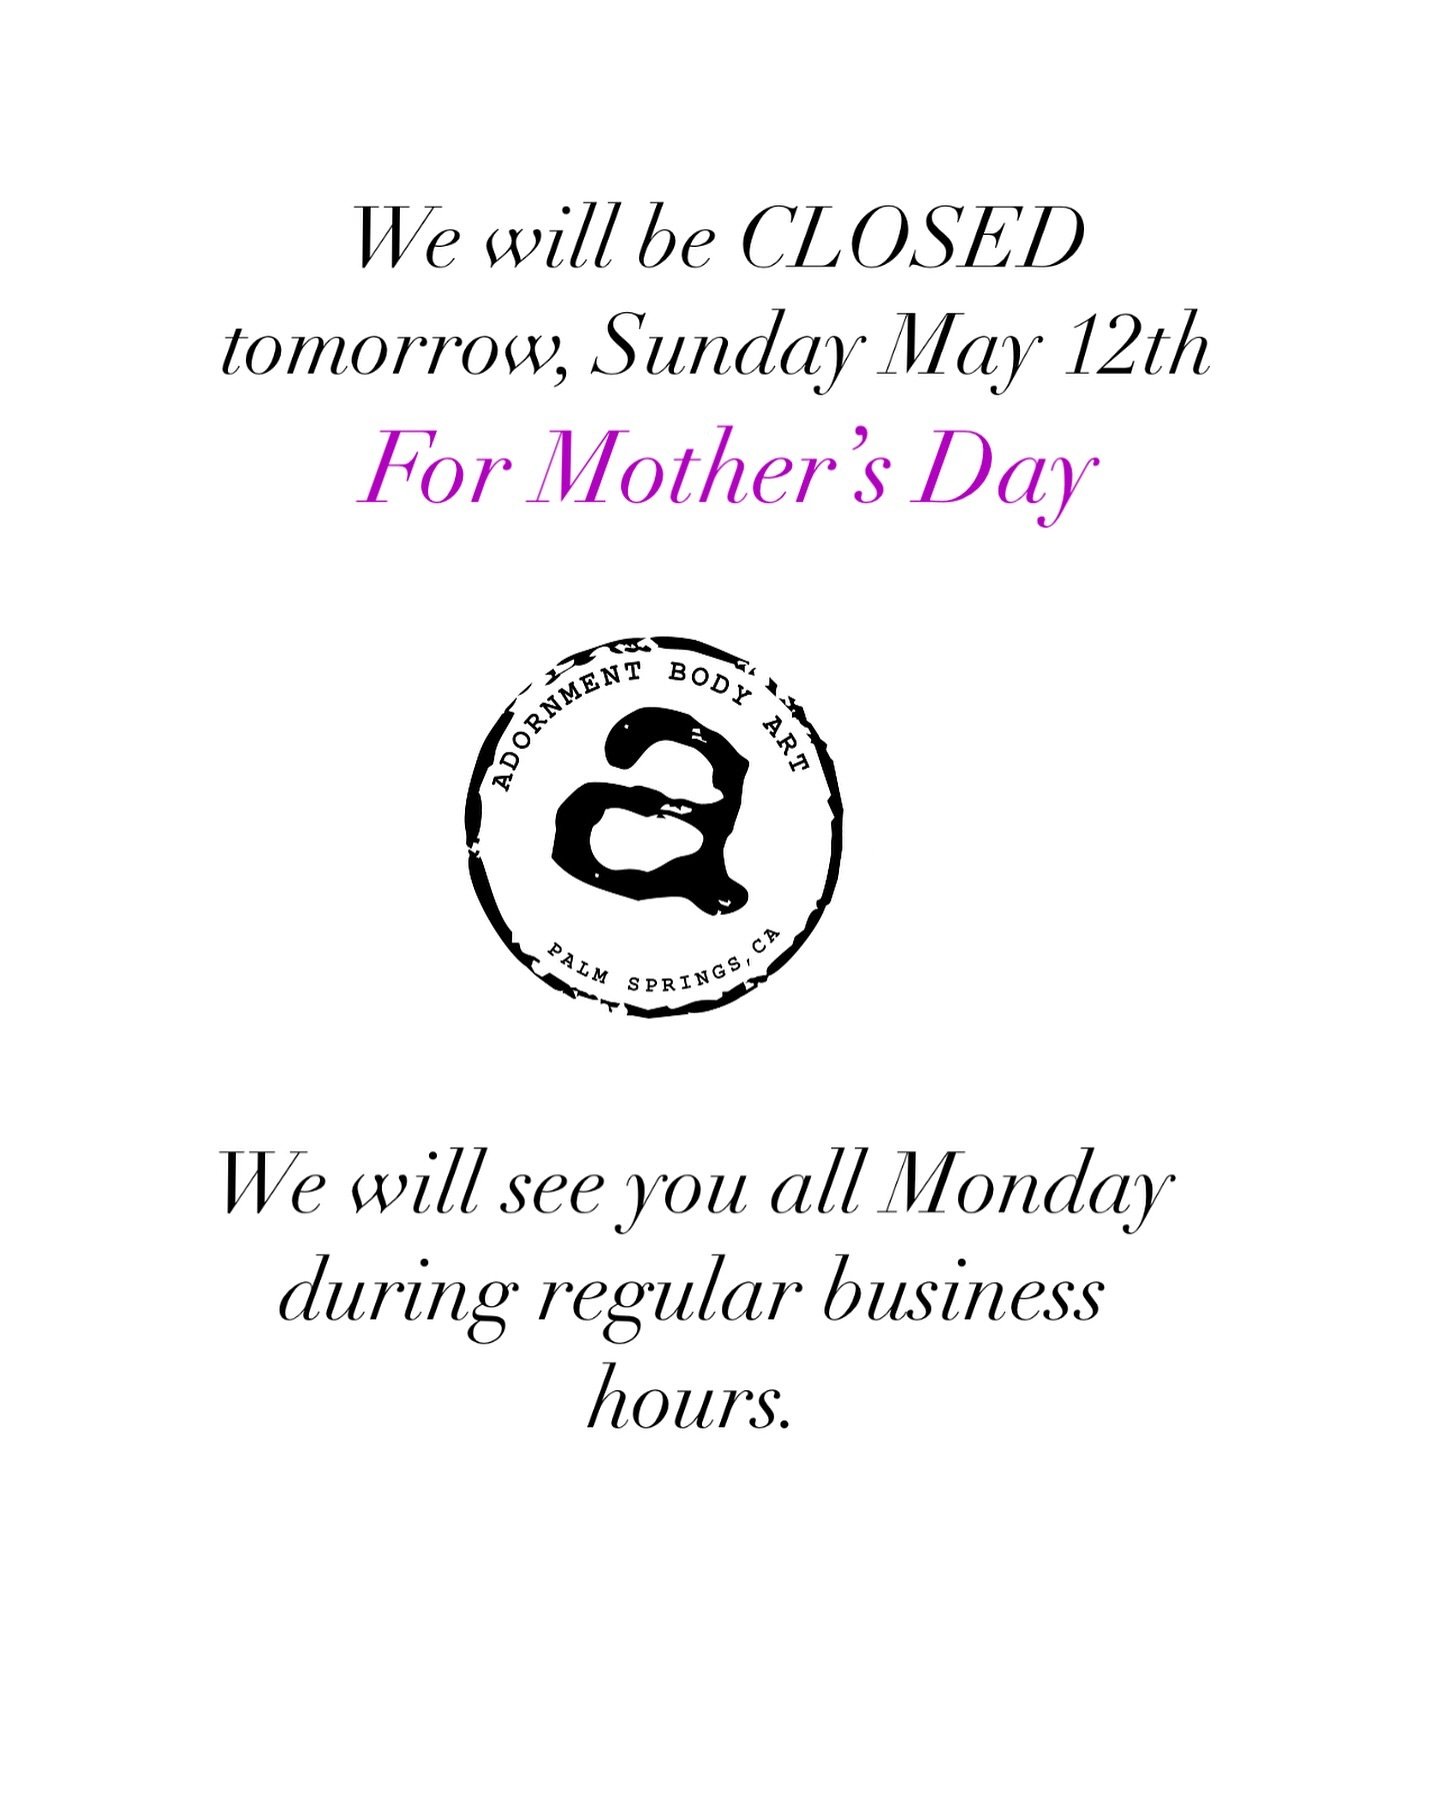 We will be CLOSED tomorrow for Mother&rsquo;s Day. We are excited to see you all during normal business hours Monday and through the week. Have an amazing Sunday everyone!